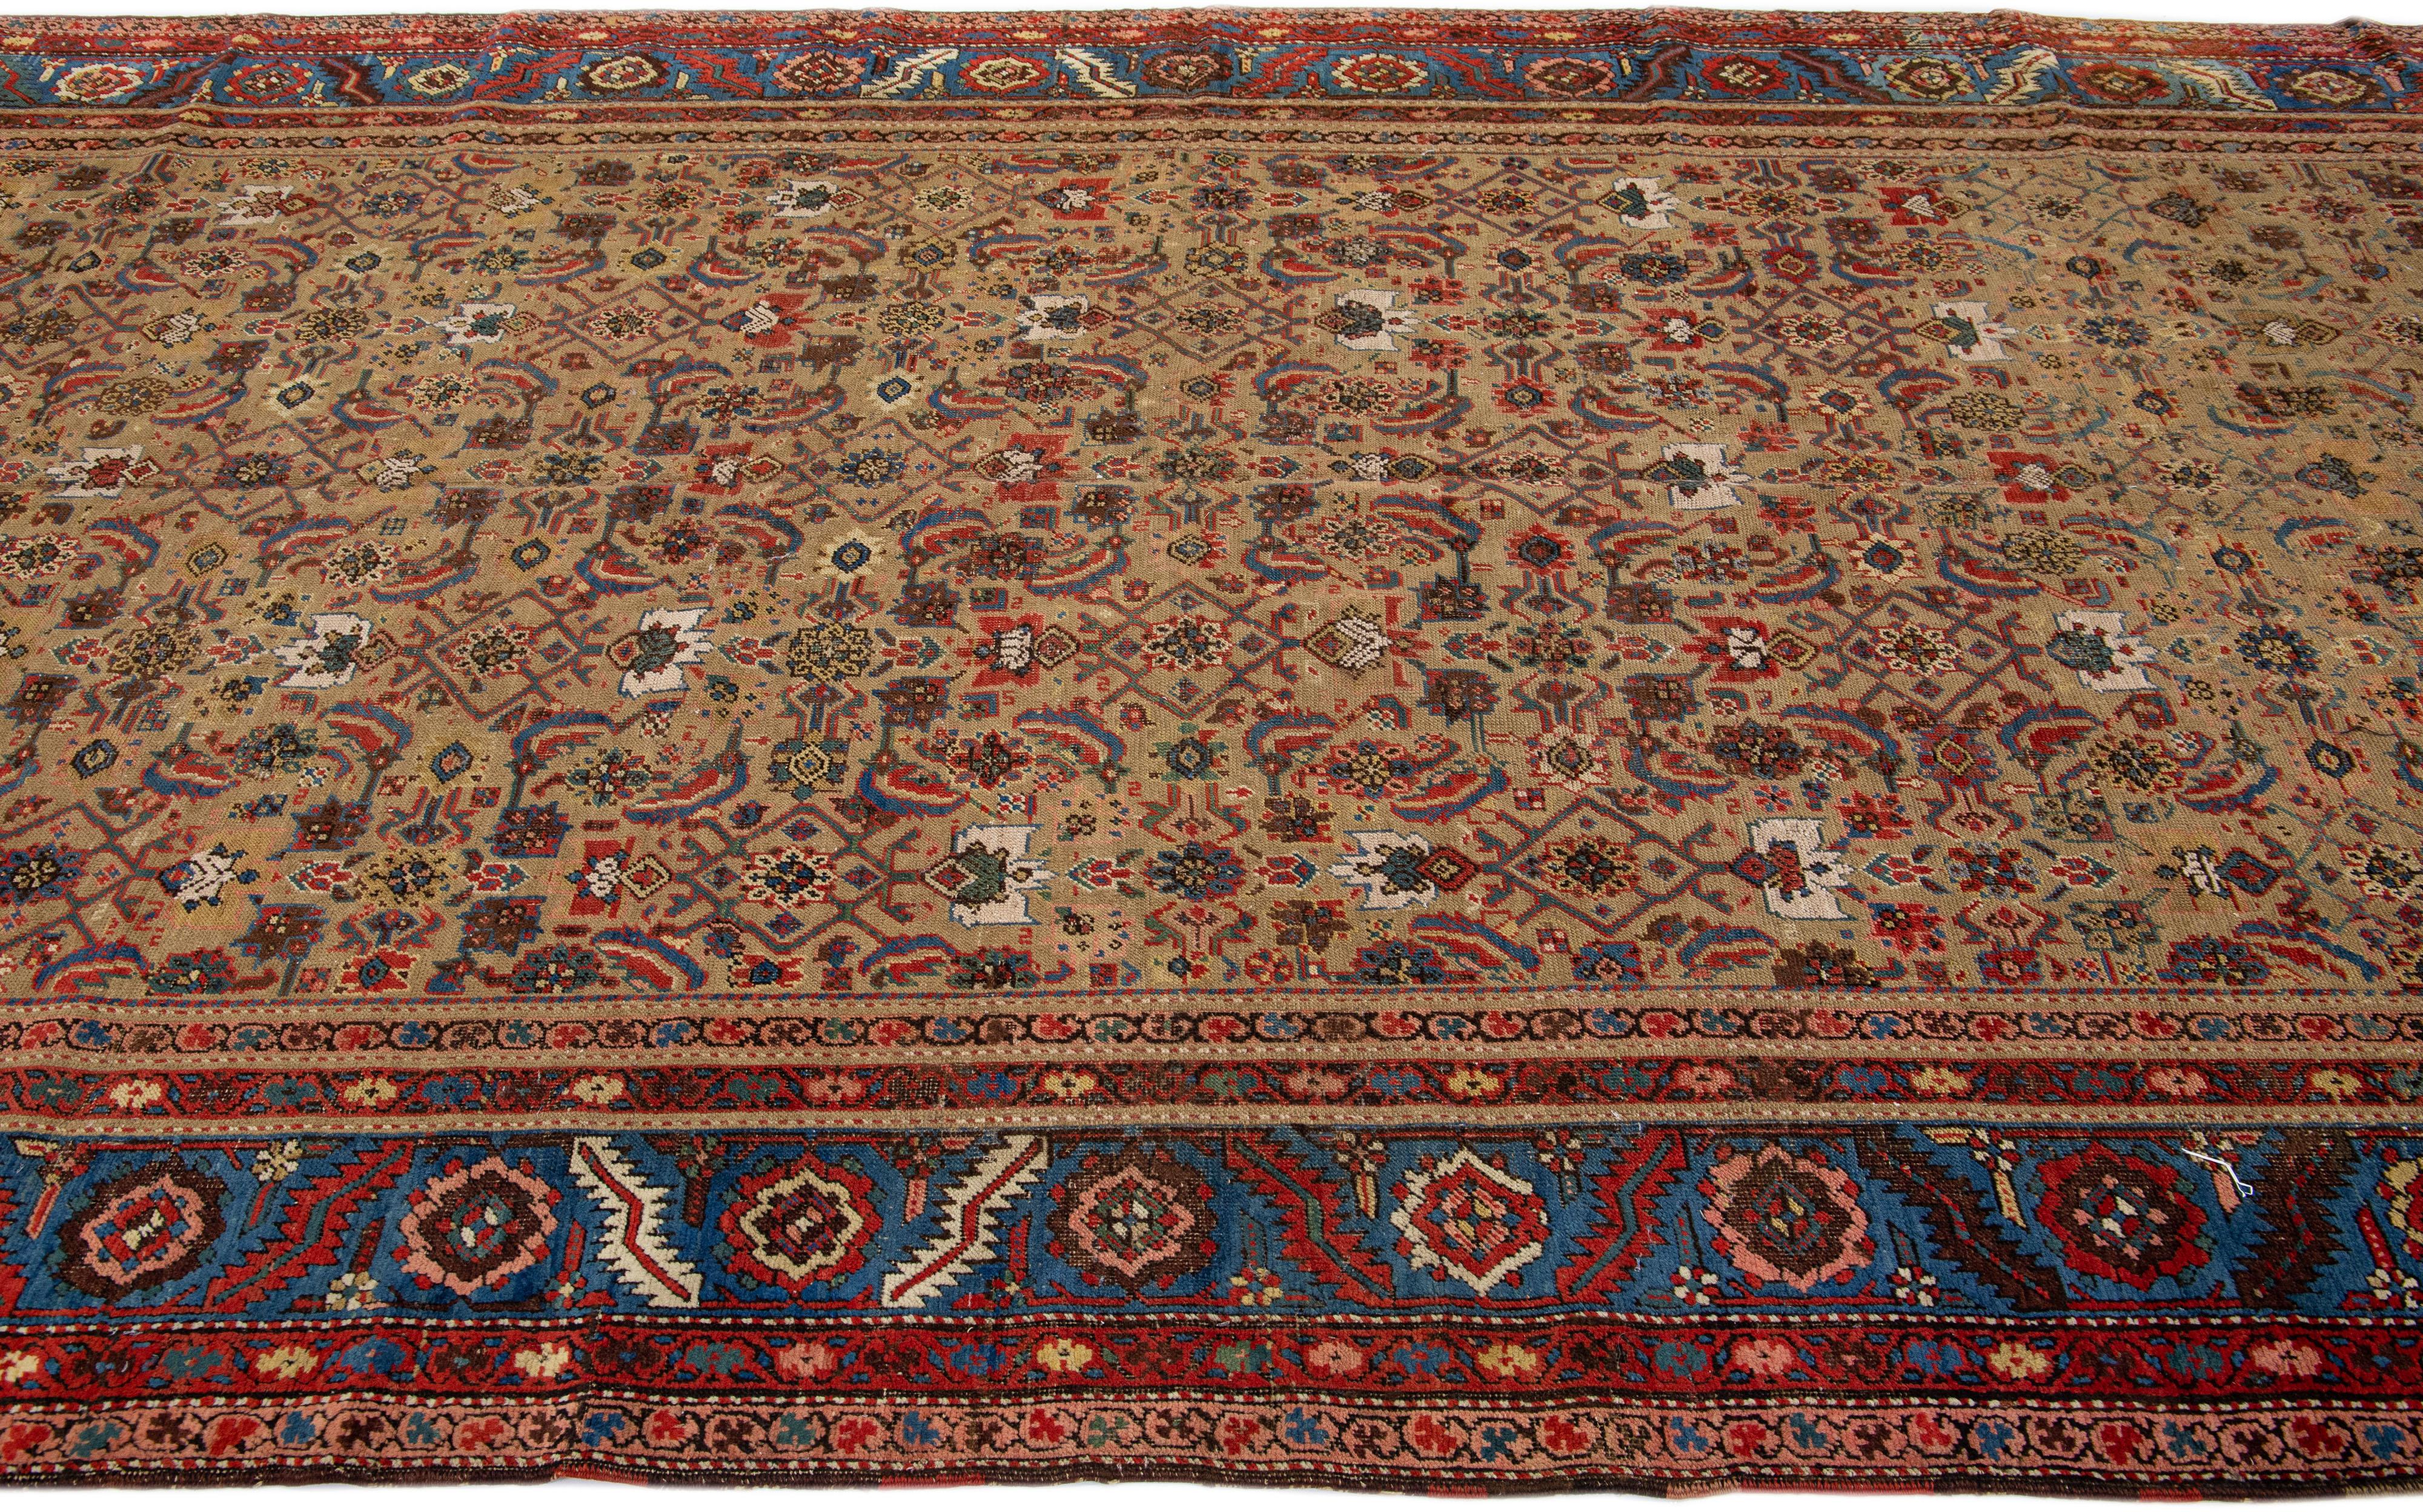 Brown Antique Bakshaish Persian Handmade Wool Rug with Allover Pattern In Excellent Condition For Sale In Norwalk, CT